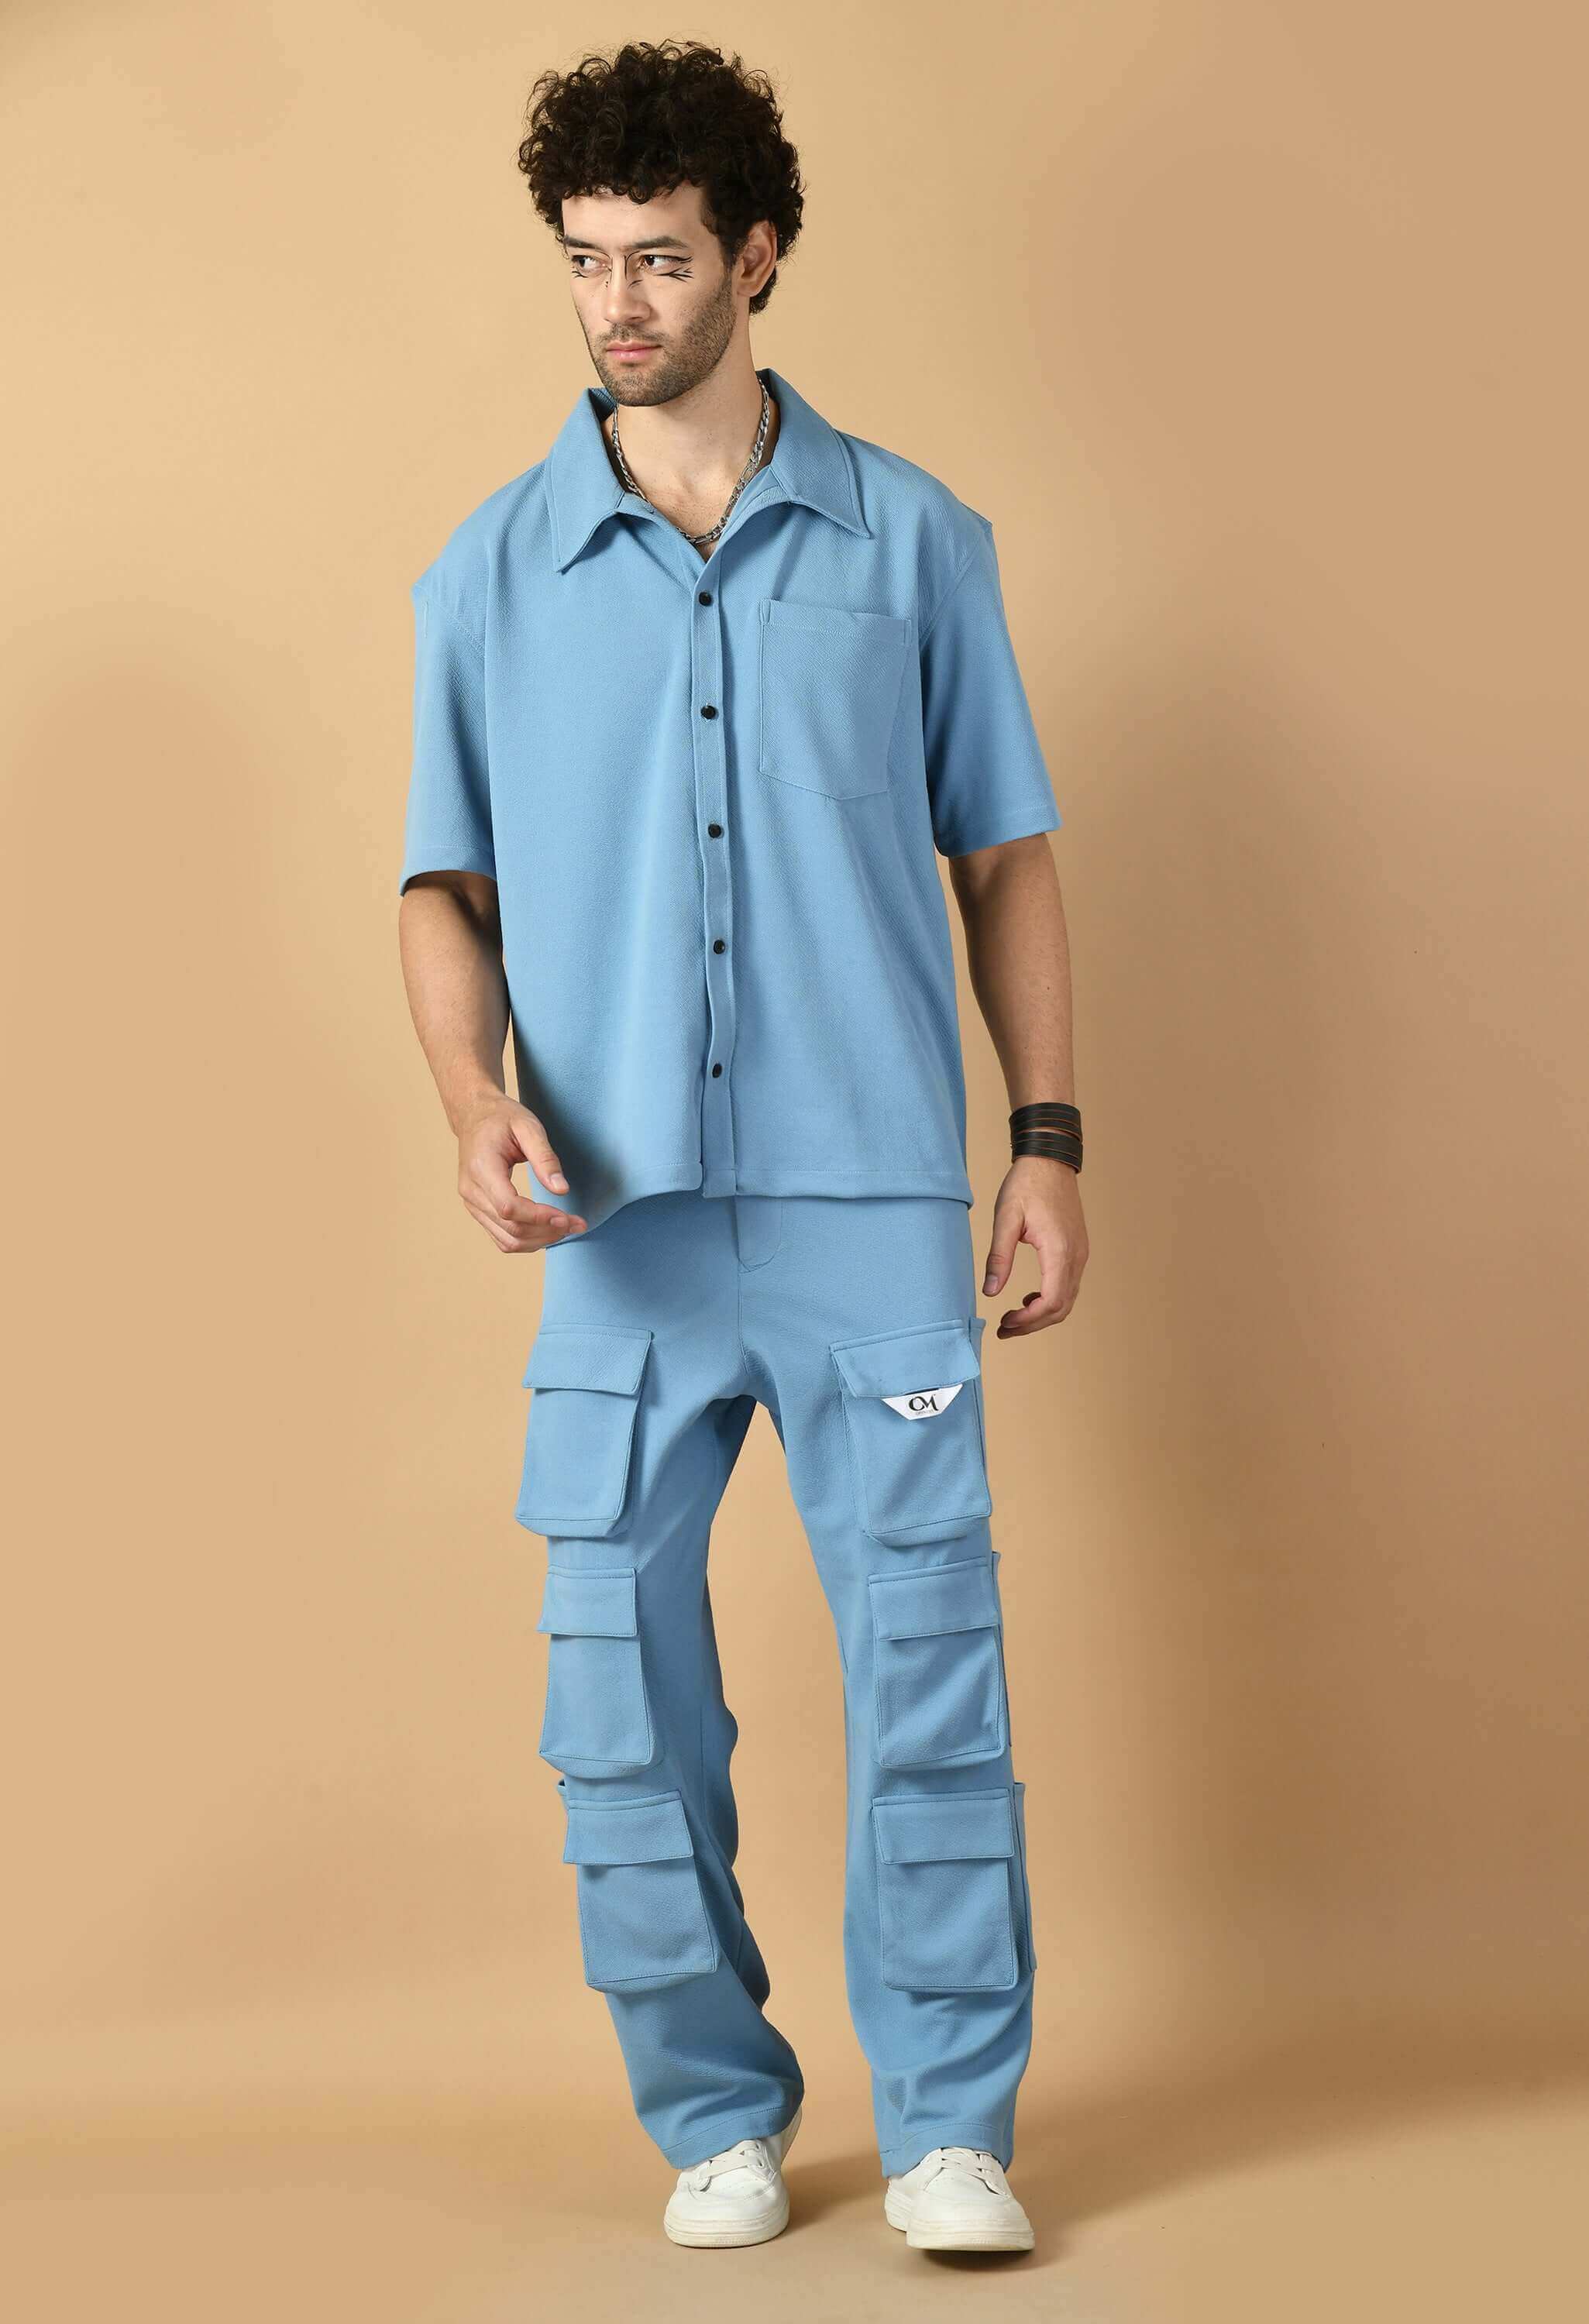 Sky blue color co-ord set by offmint